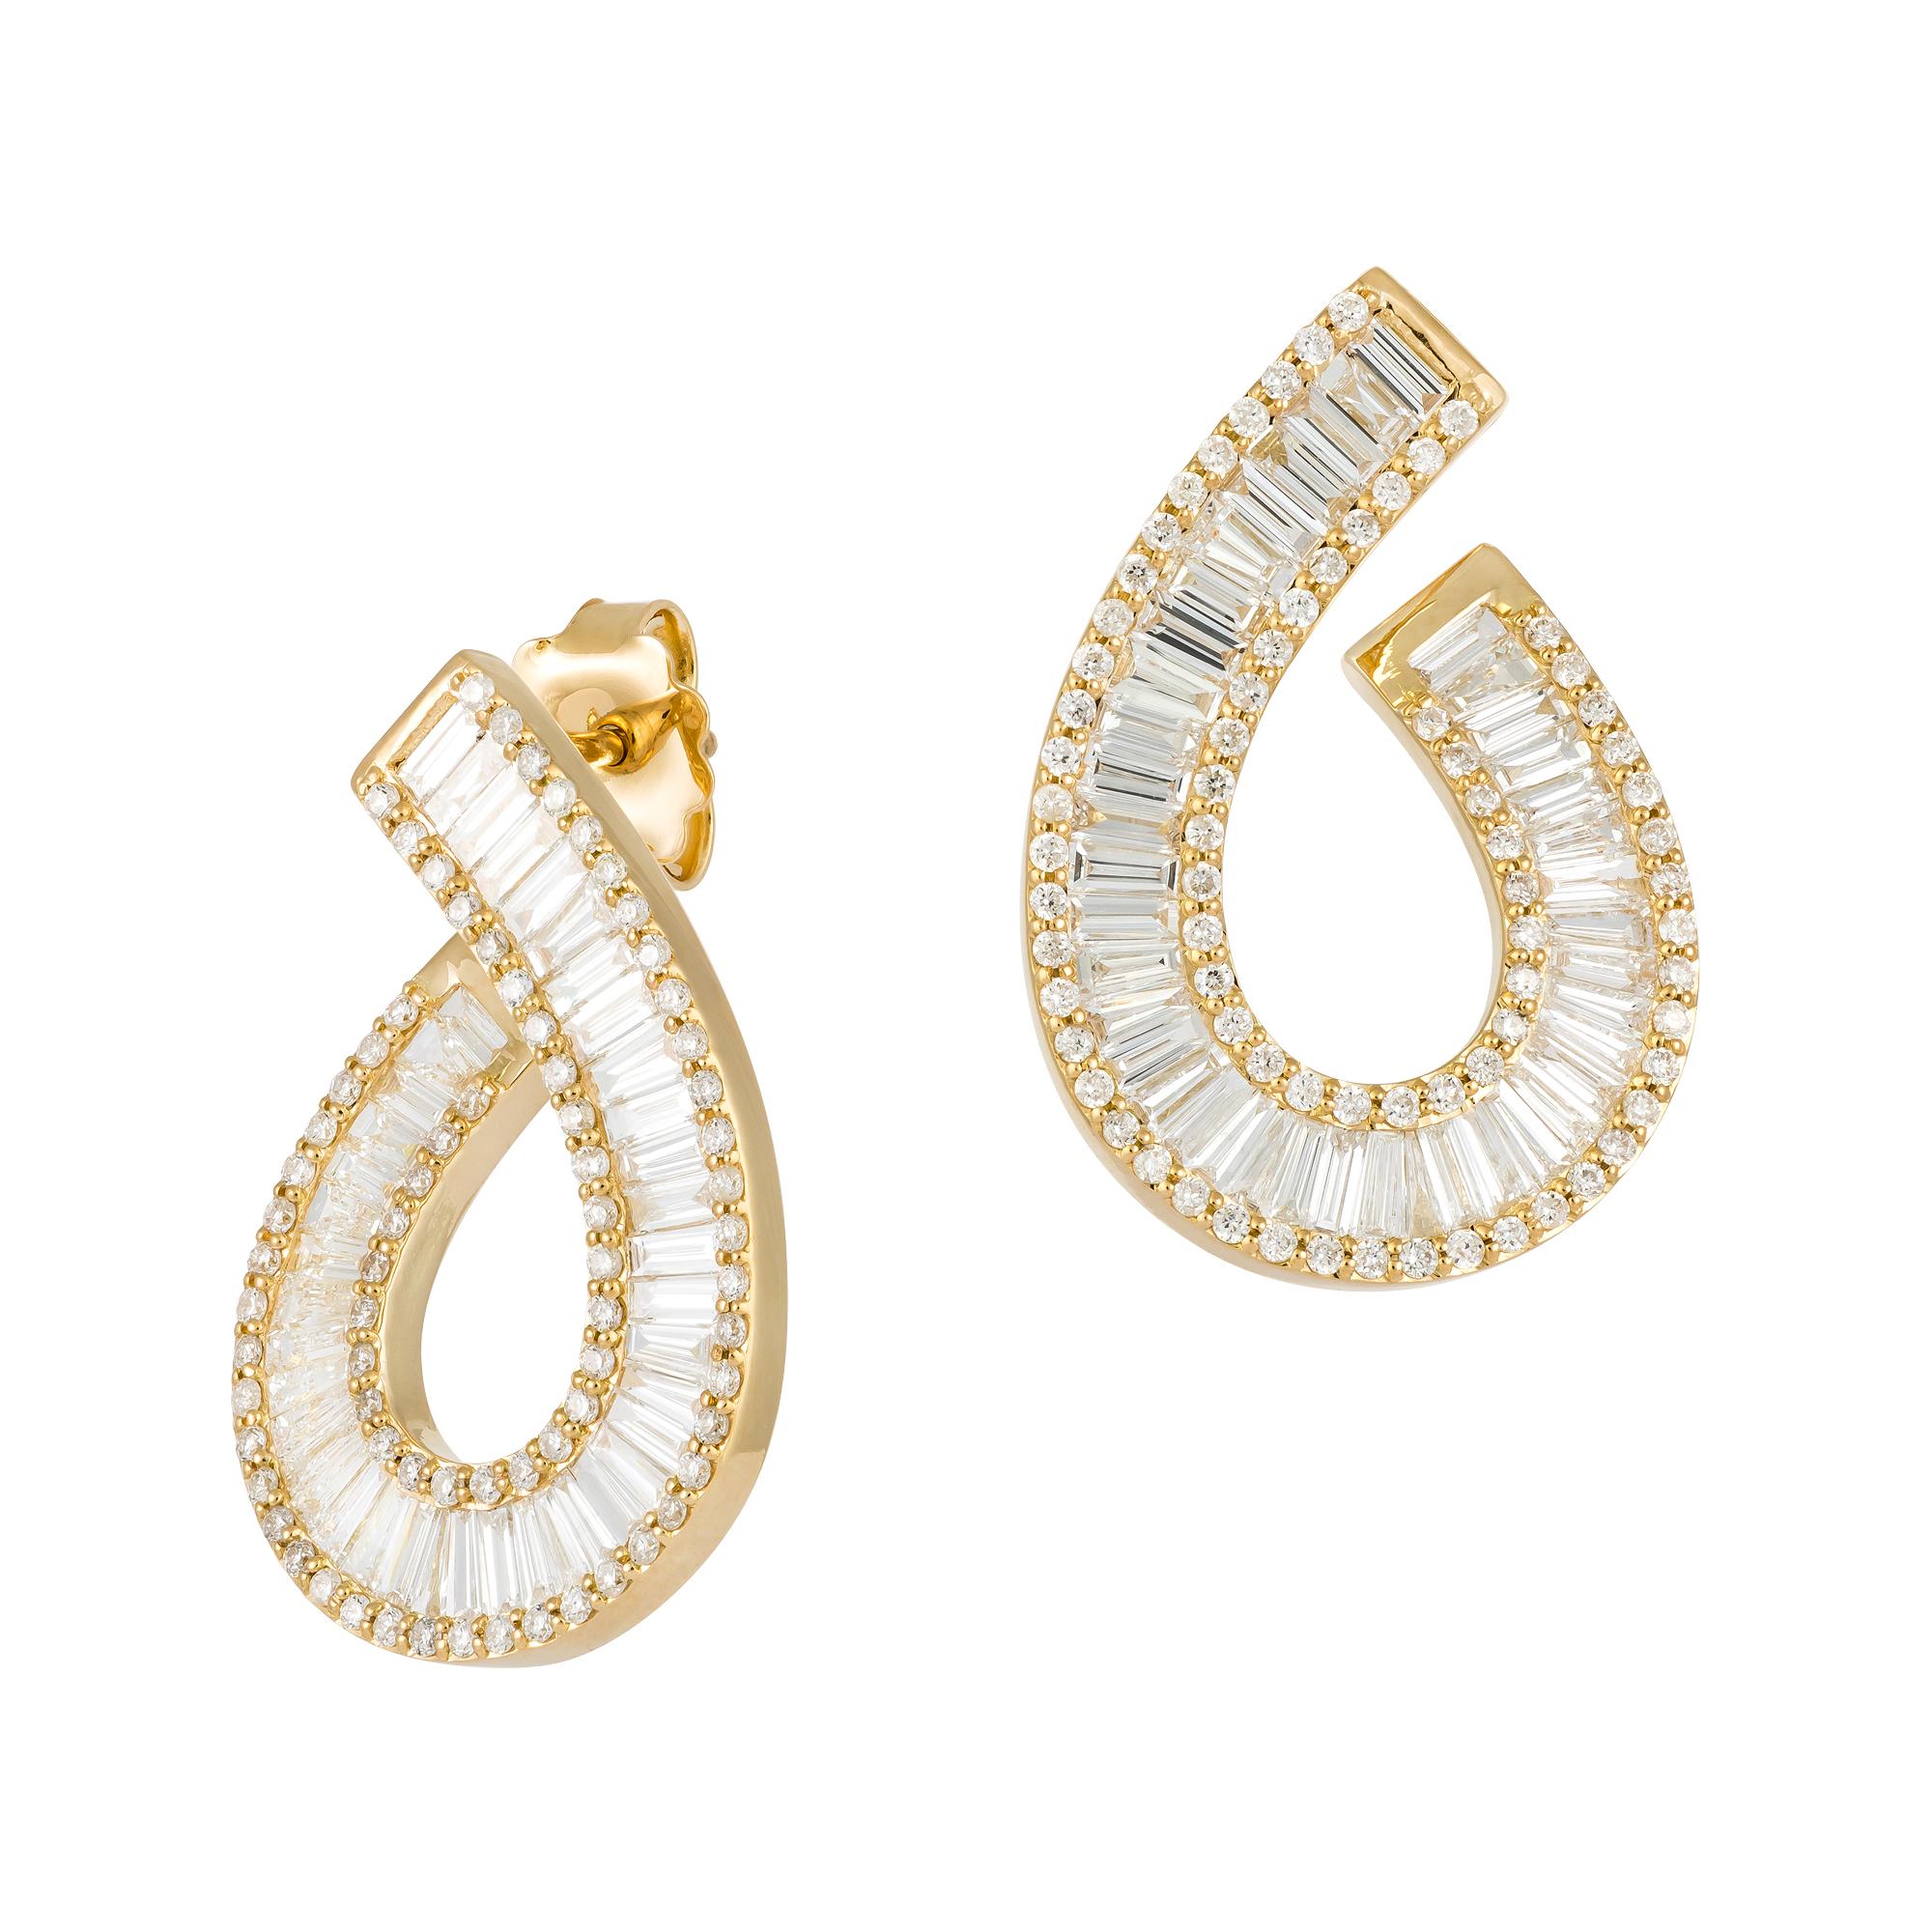 Modern Chic Yellow Gold 18K Earrings Diamond For Her For Sale